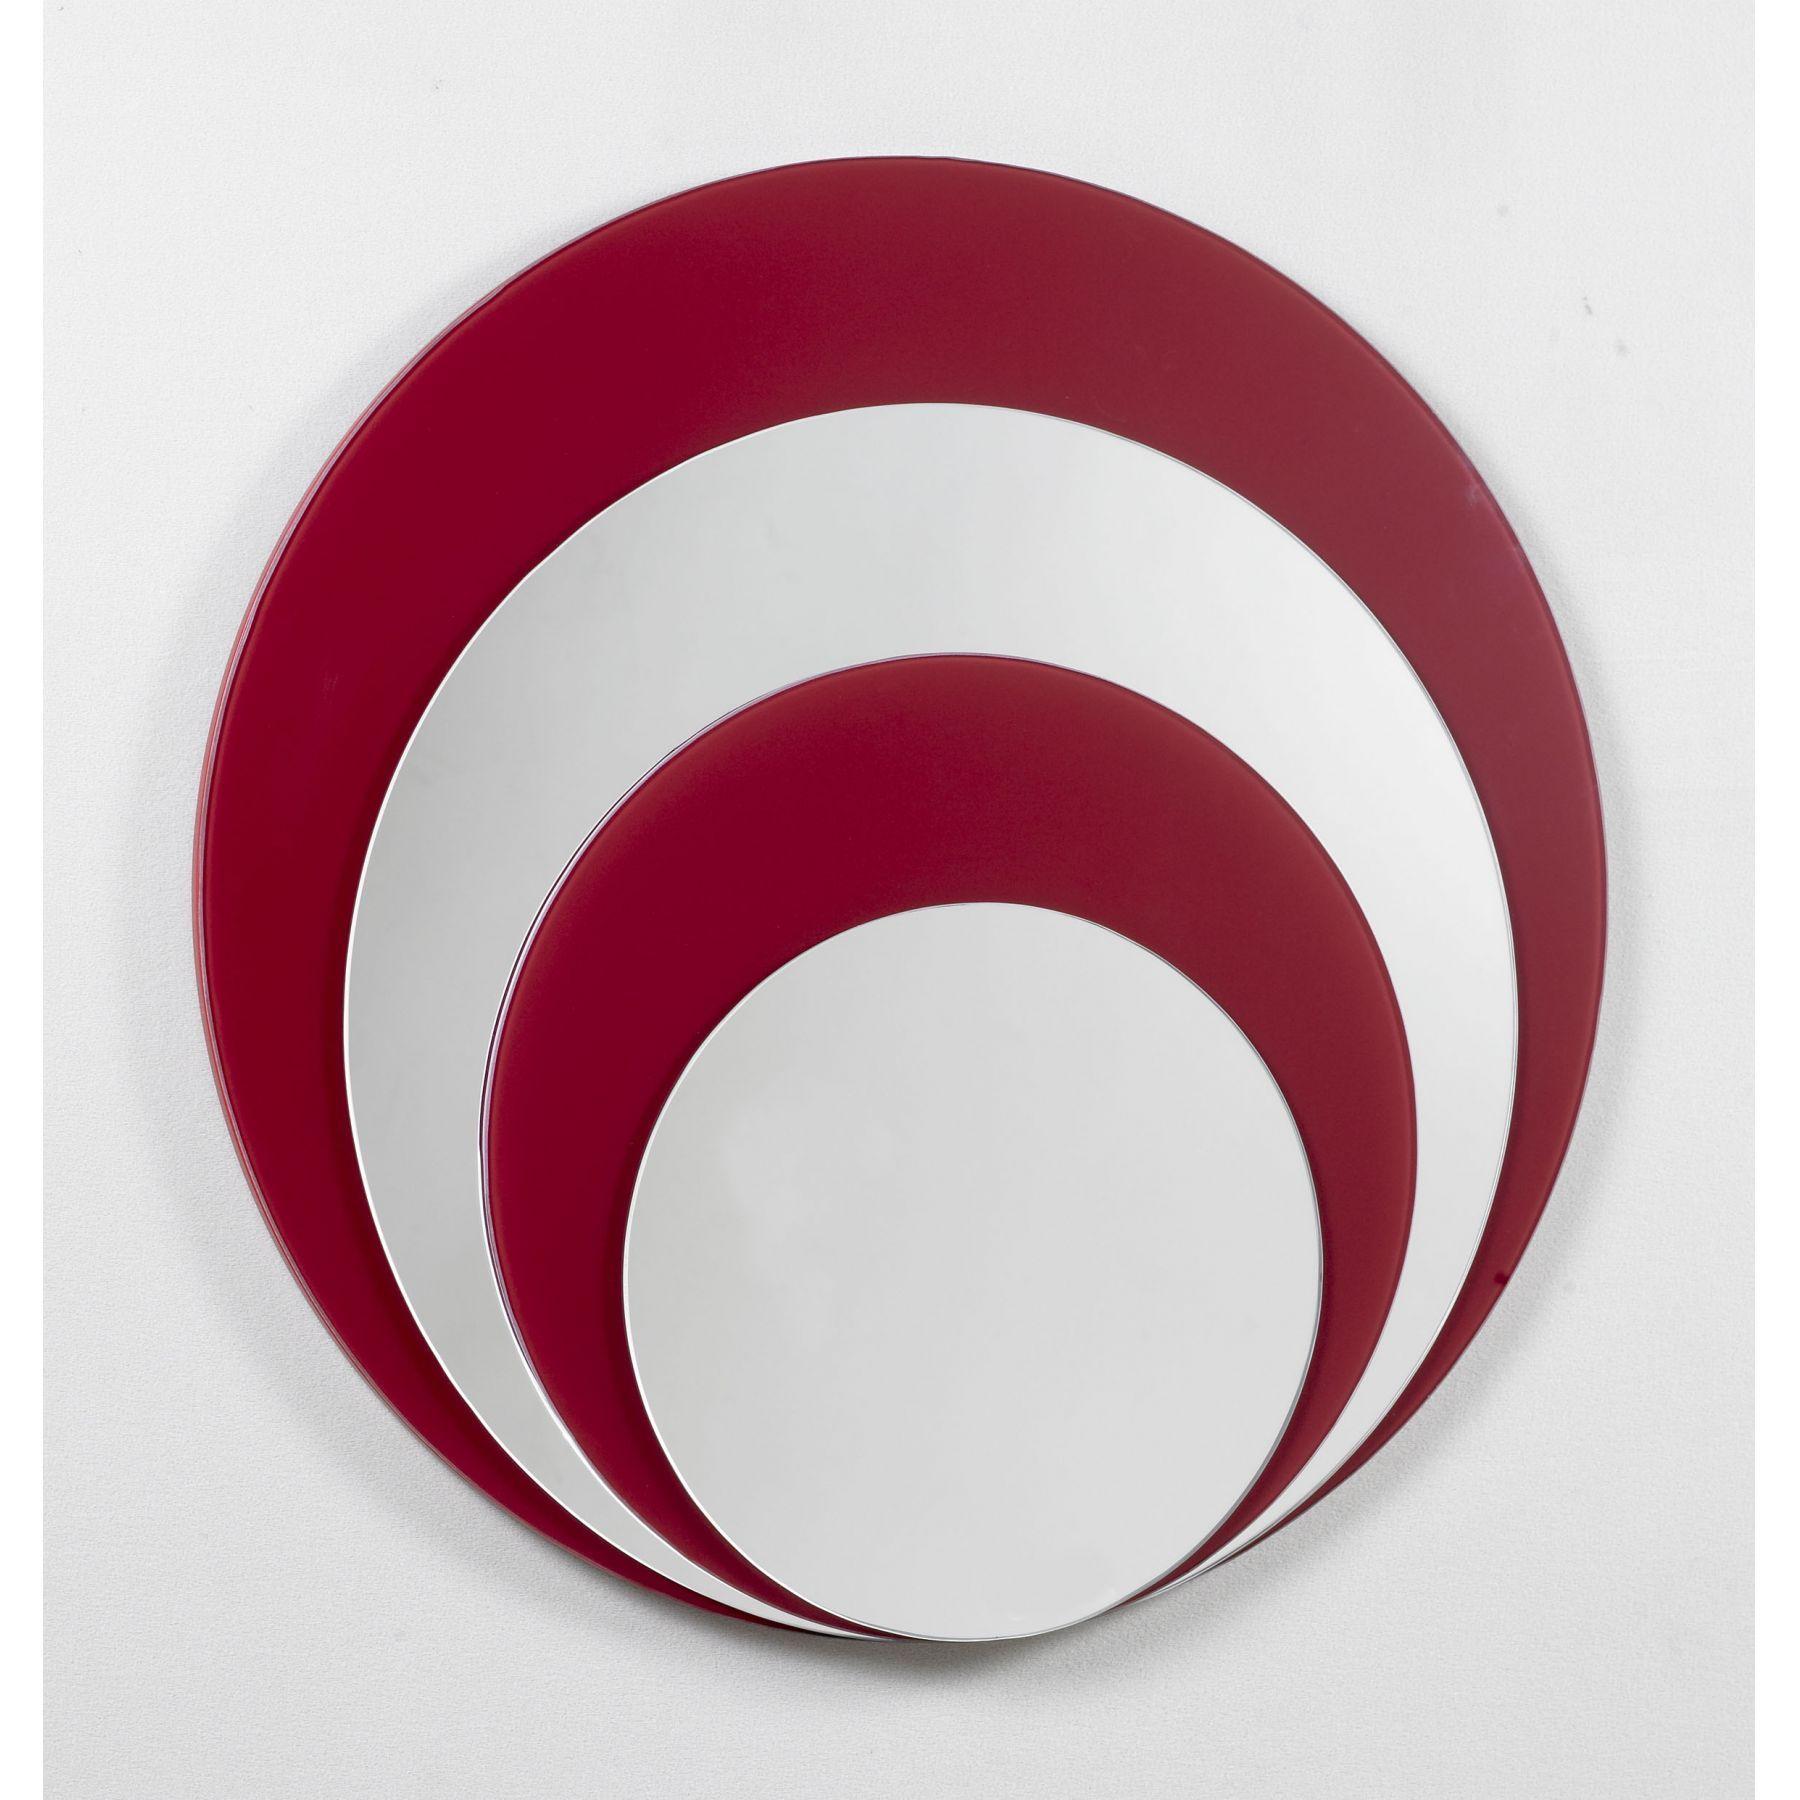 2 Red Circle Logo - Red Circle Mirror 2 - Miscellaneous from Homesdirect 365 UK